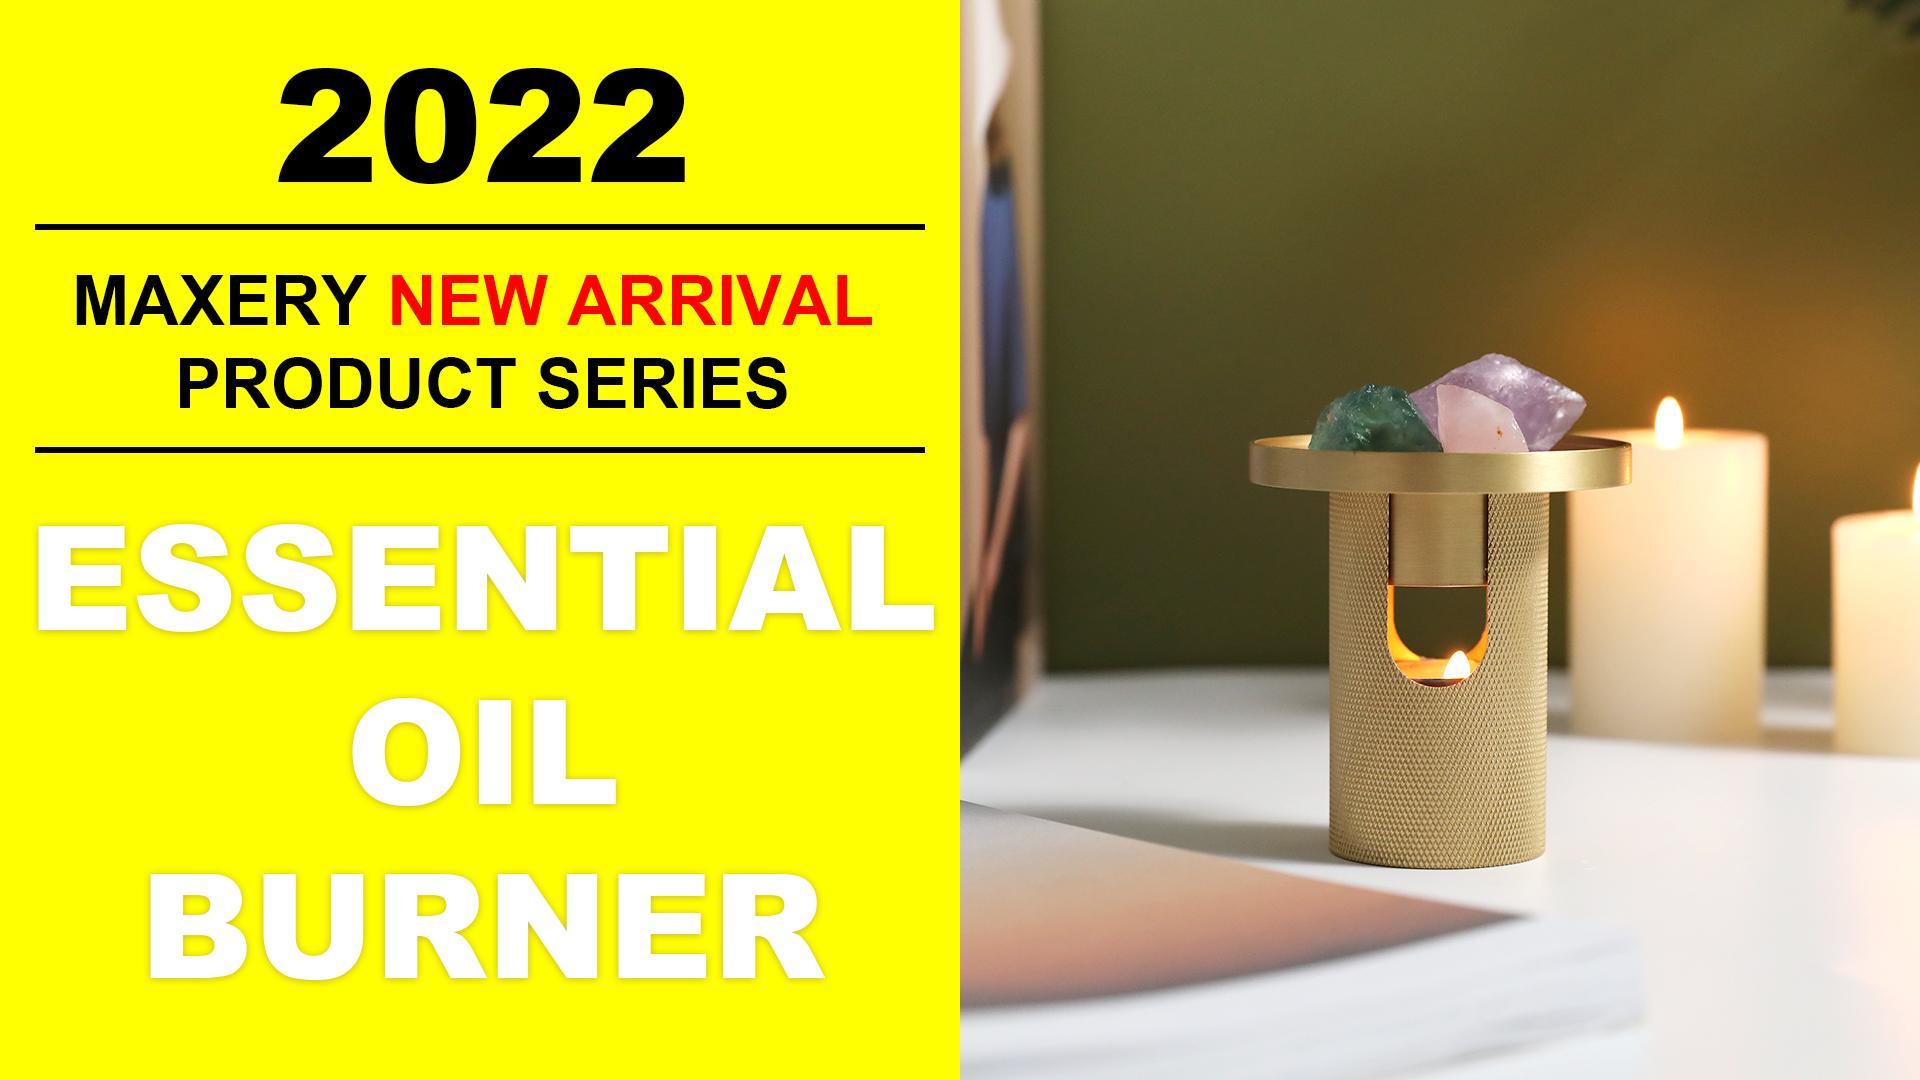 Maxery New Arrival Product Introduction-No. 3 Knurled Brass Essential Oil burner